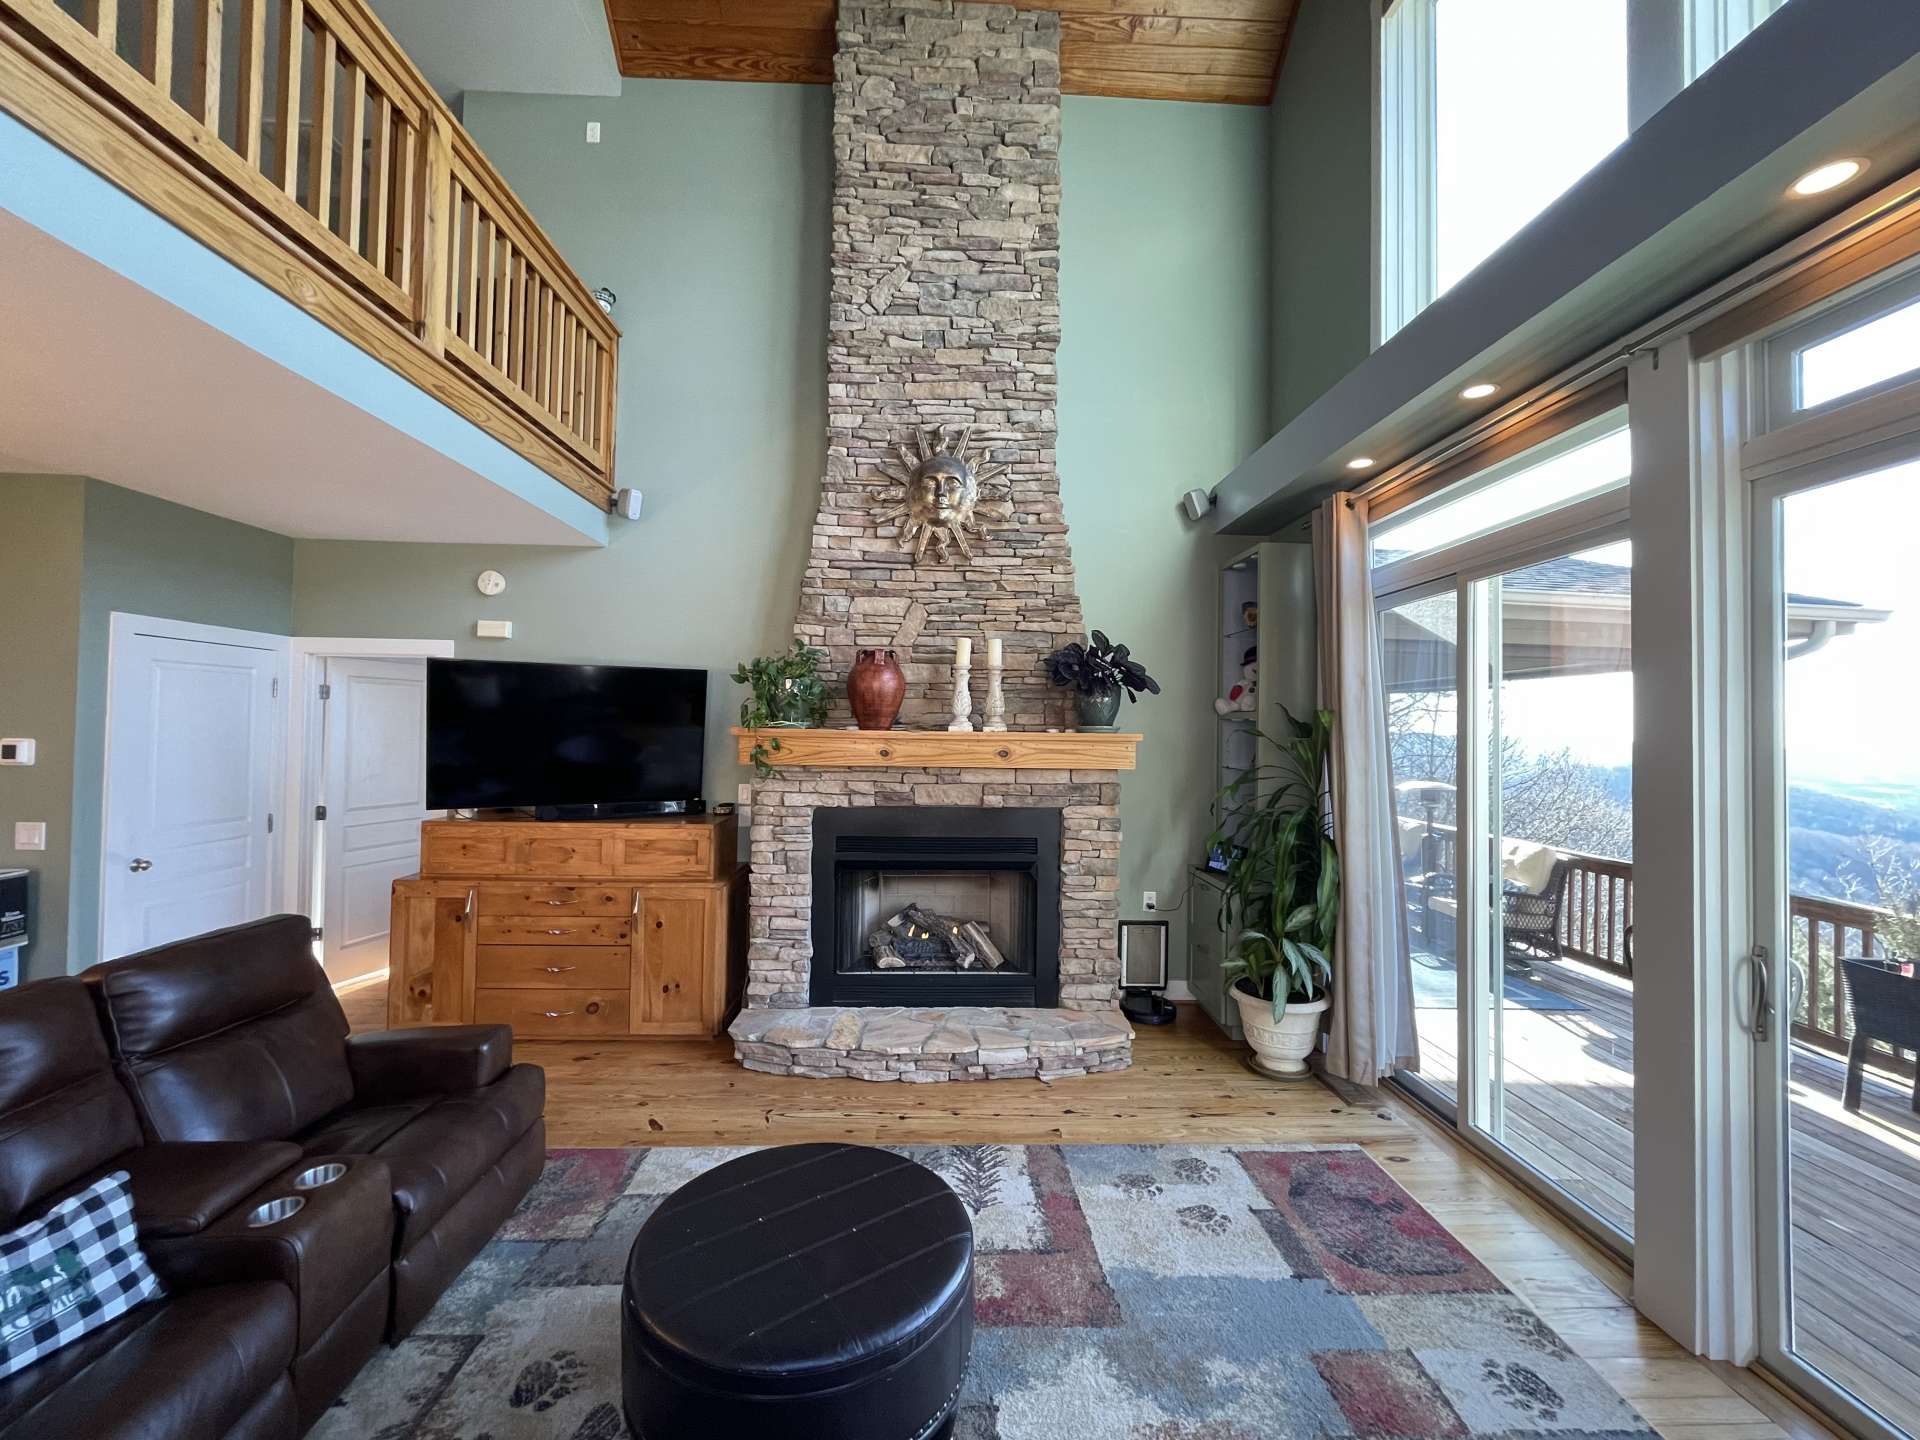 Floor to ceiling stone fireplace.